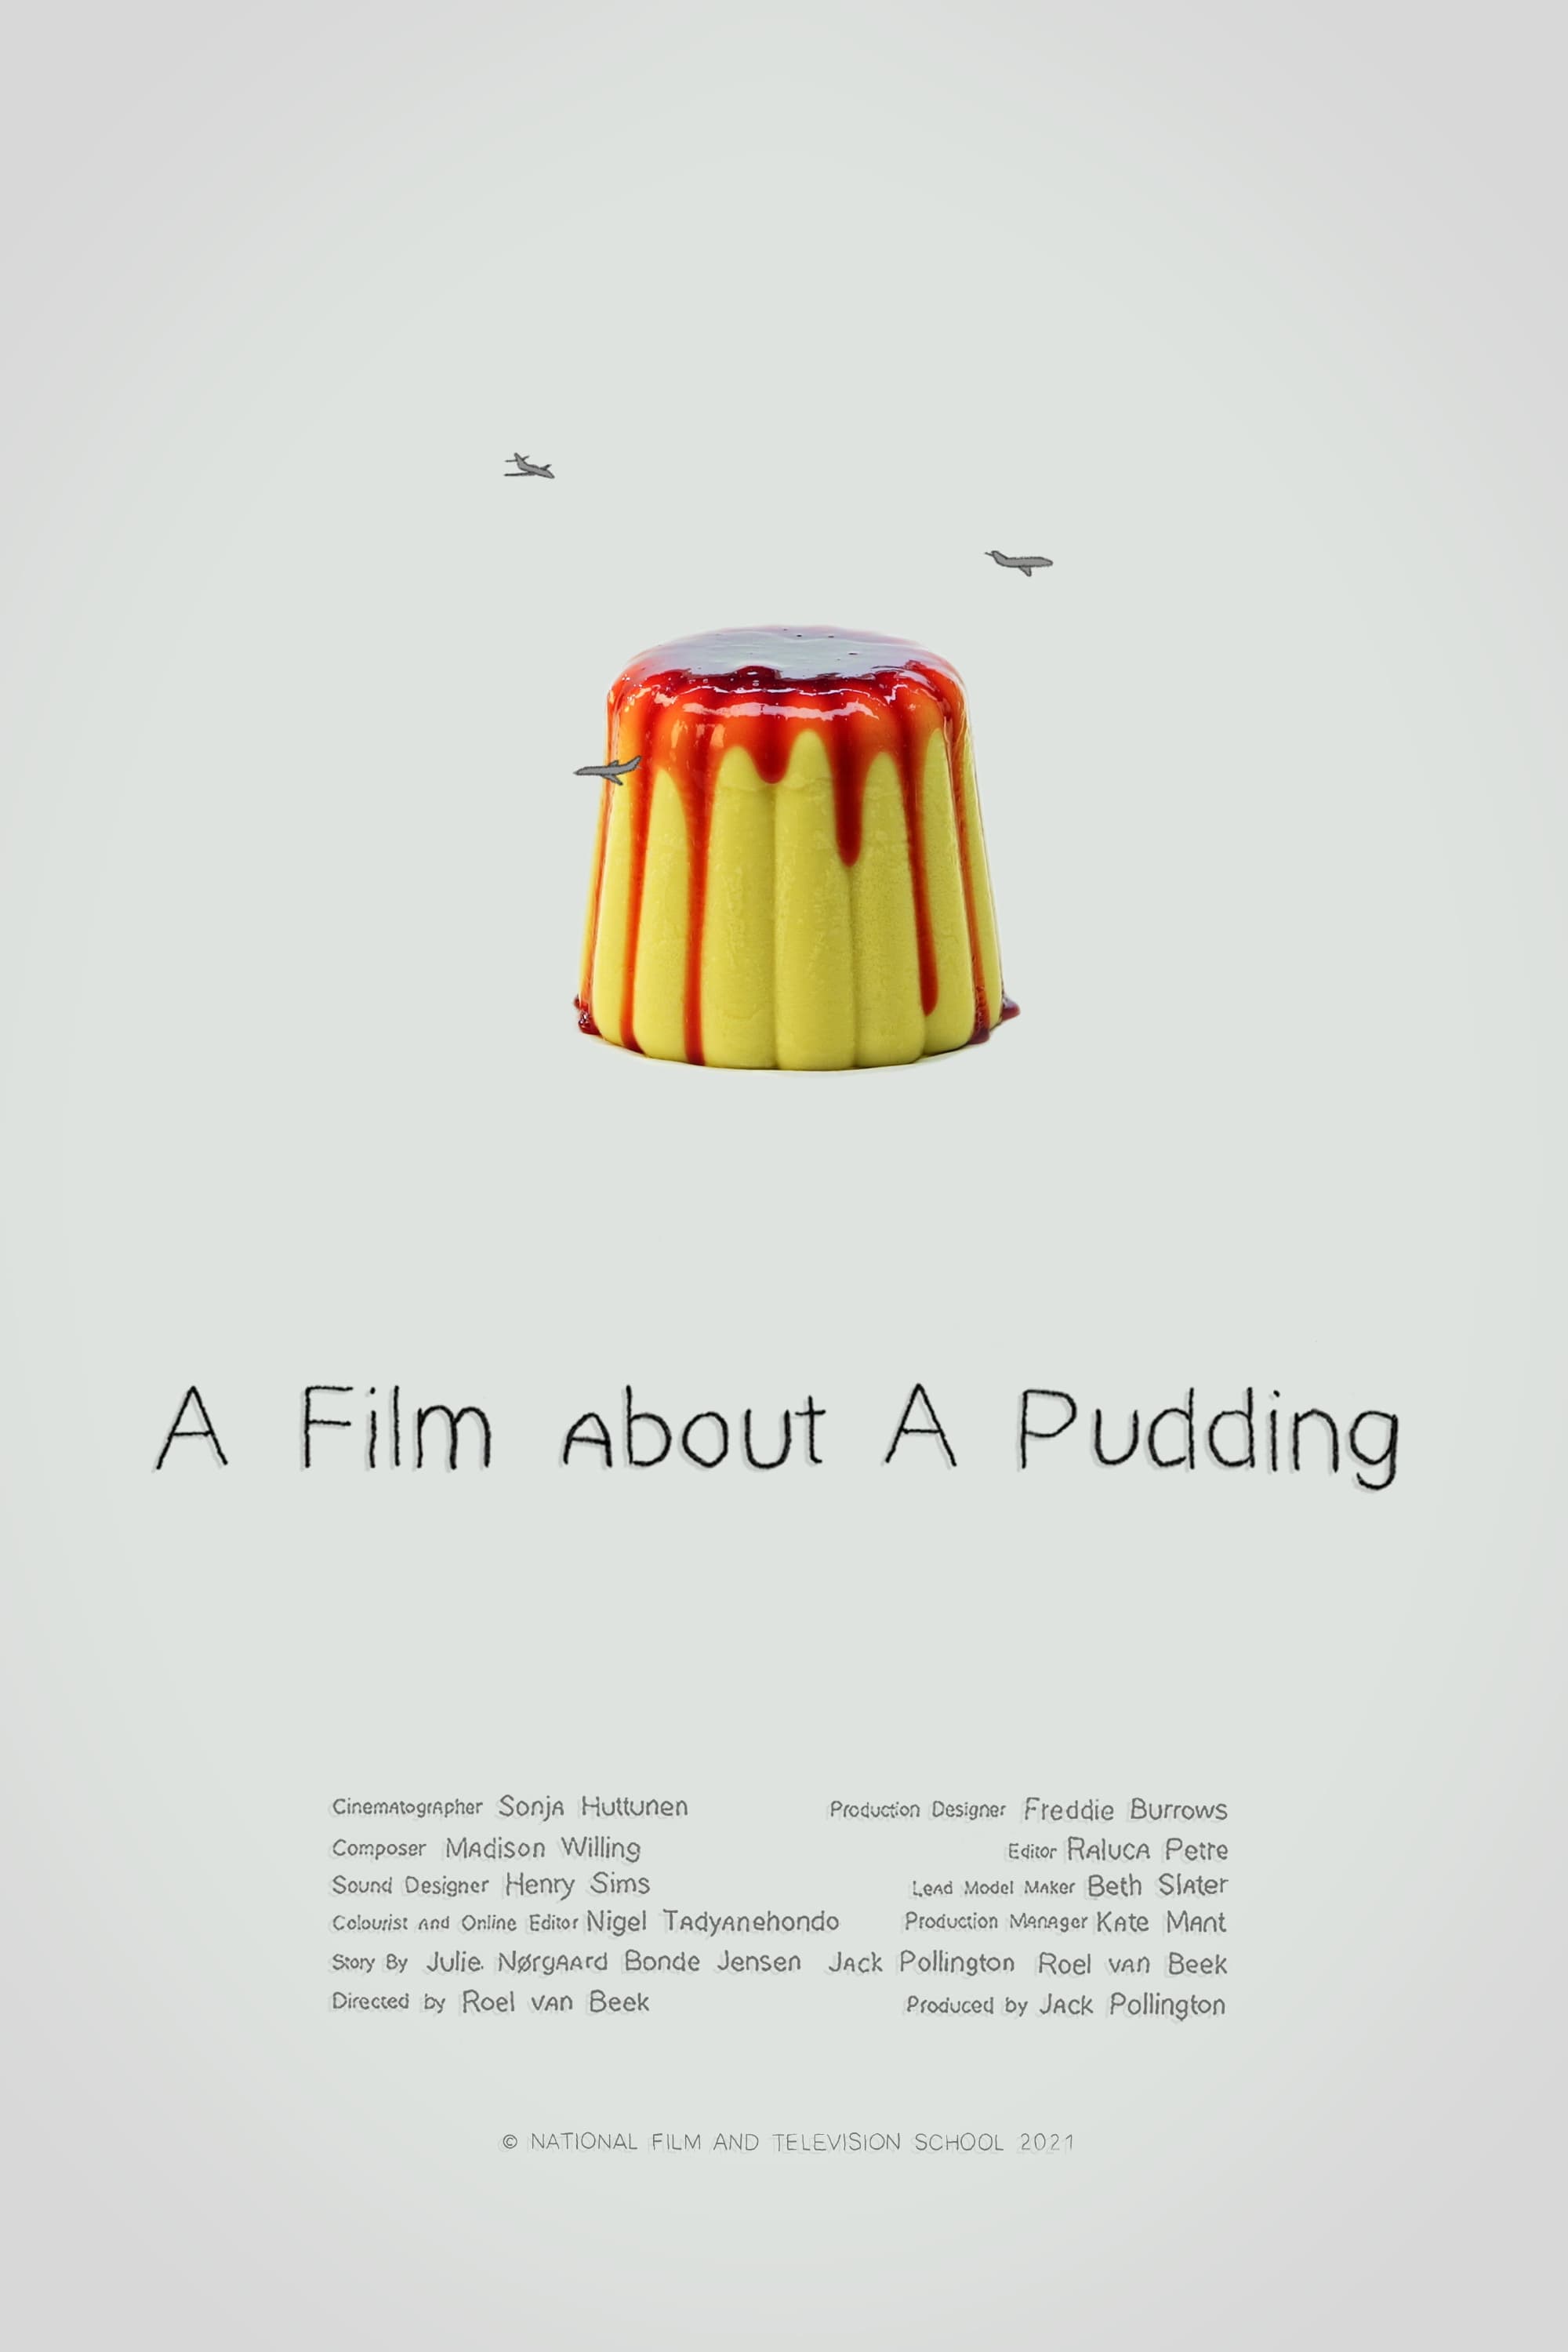 A Film about a Pudding